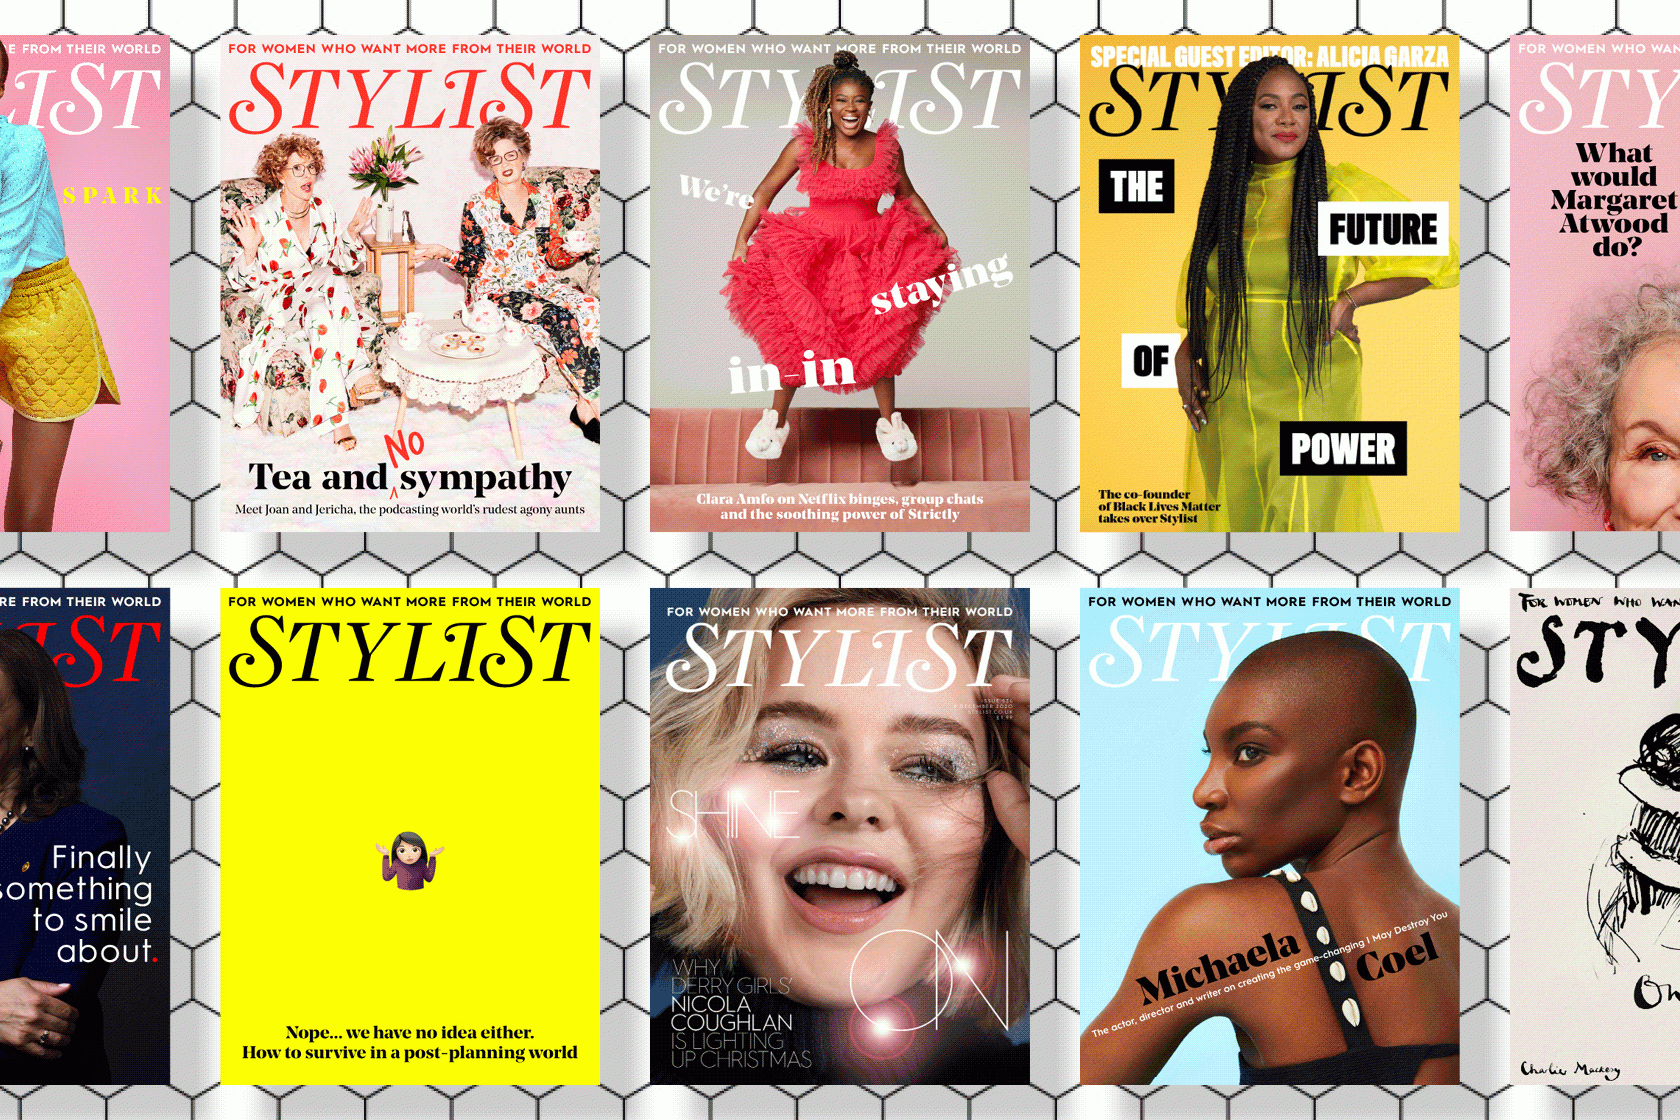 Stylist covers